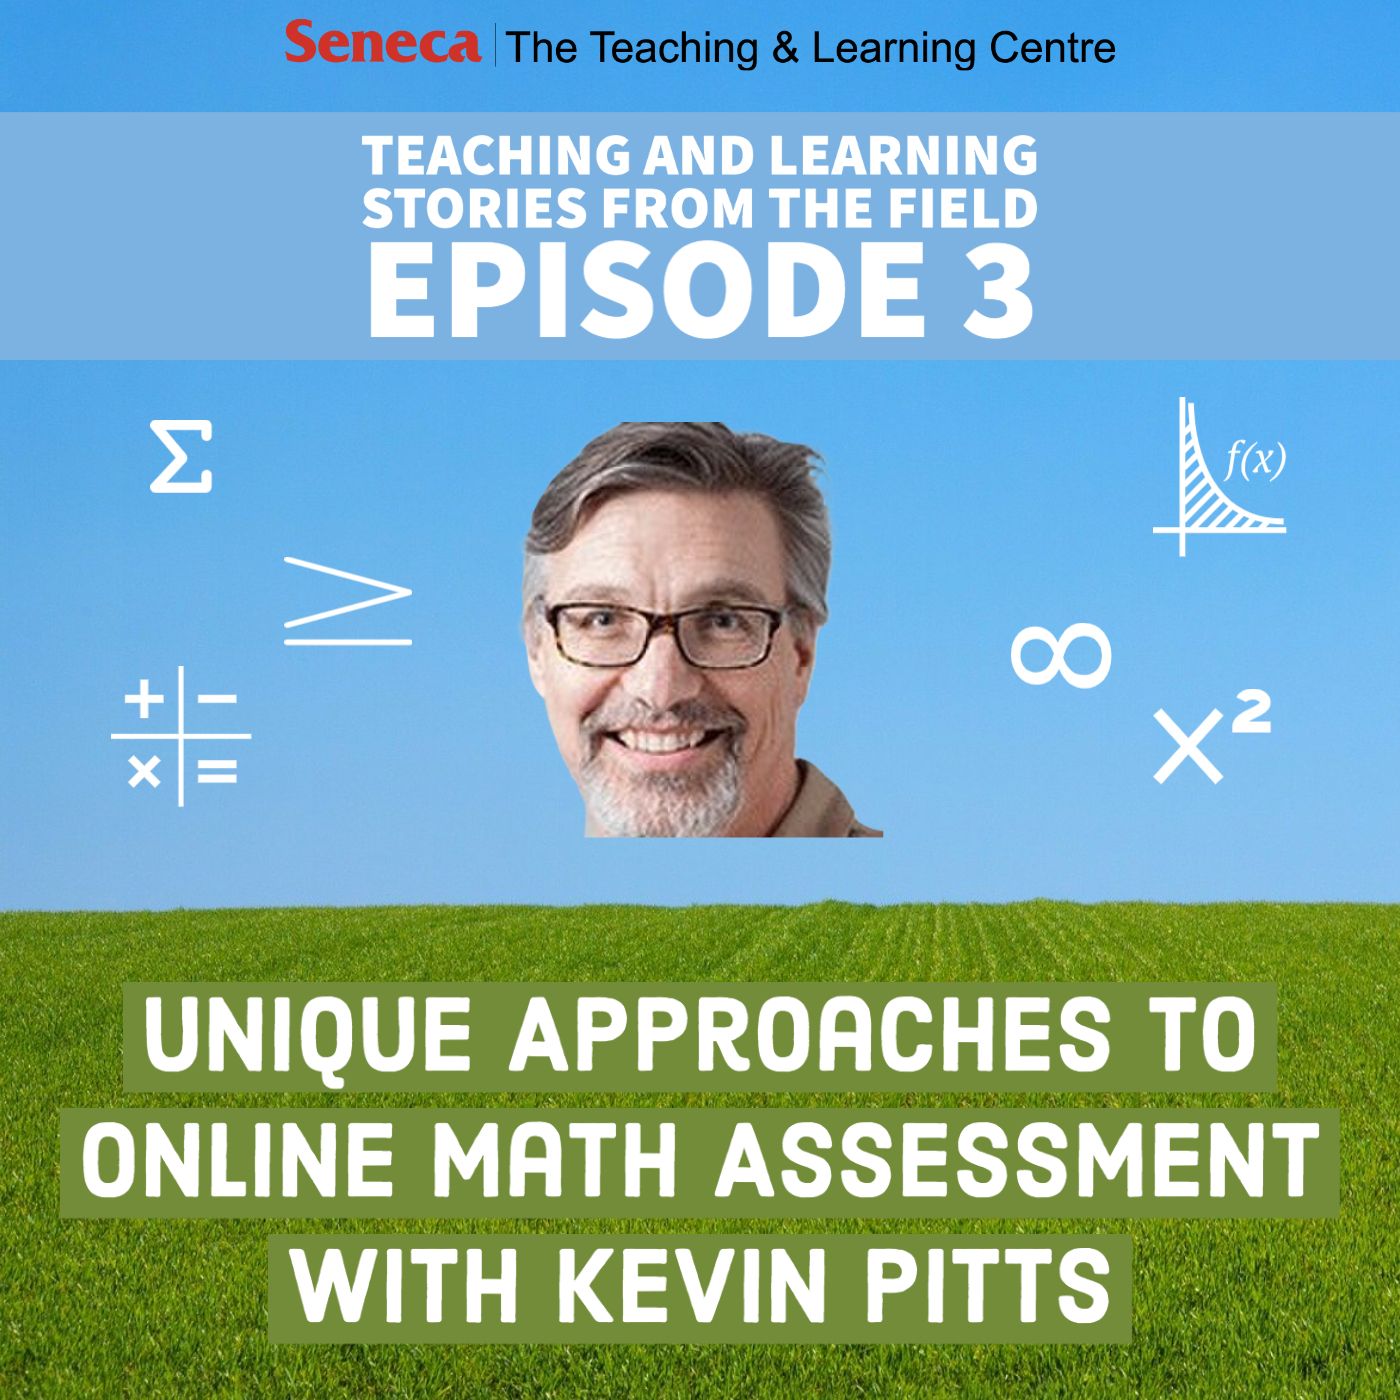 Unique Approaches to Online Math Assessment with Kevin Pitts